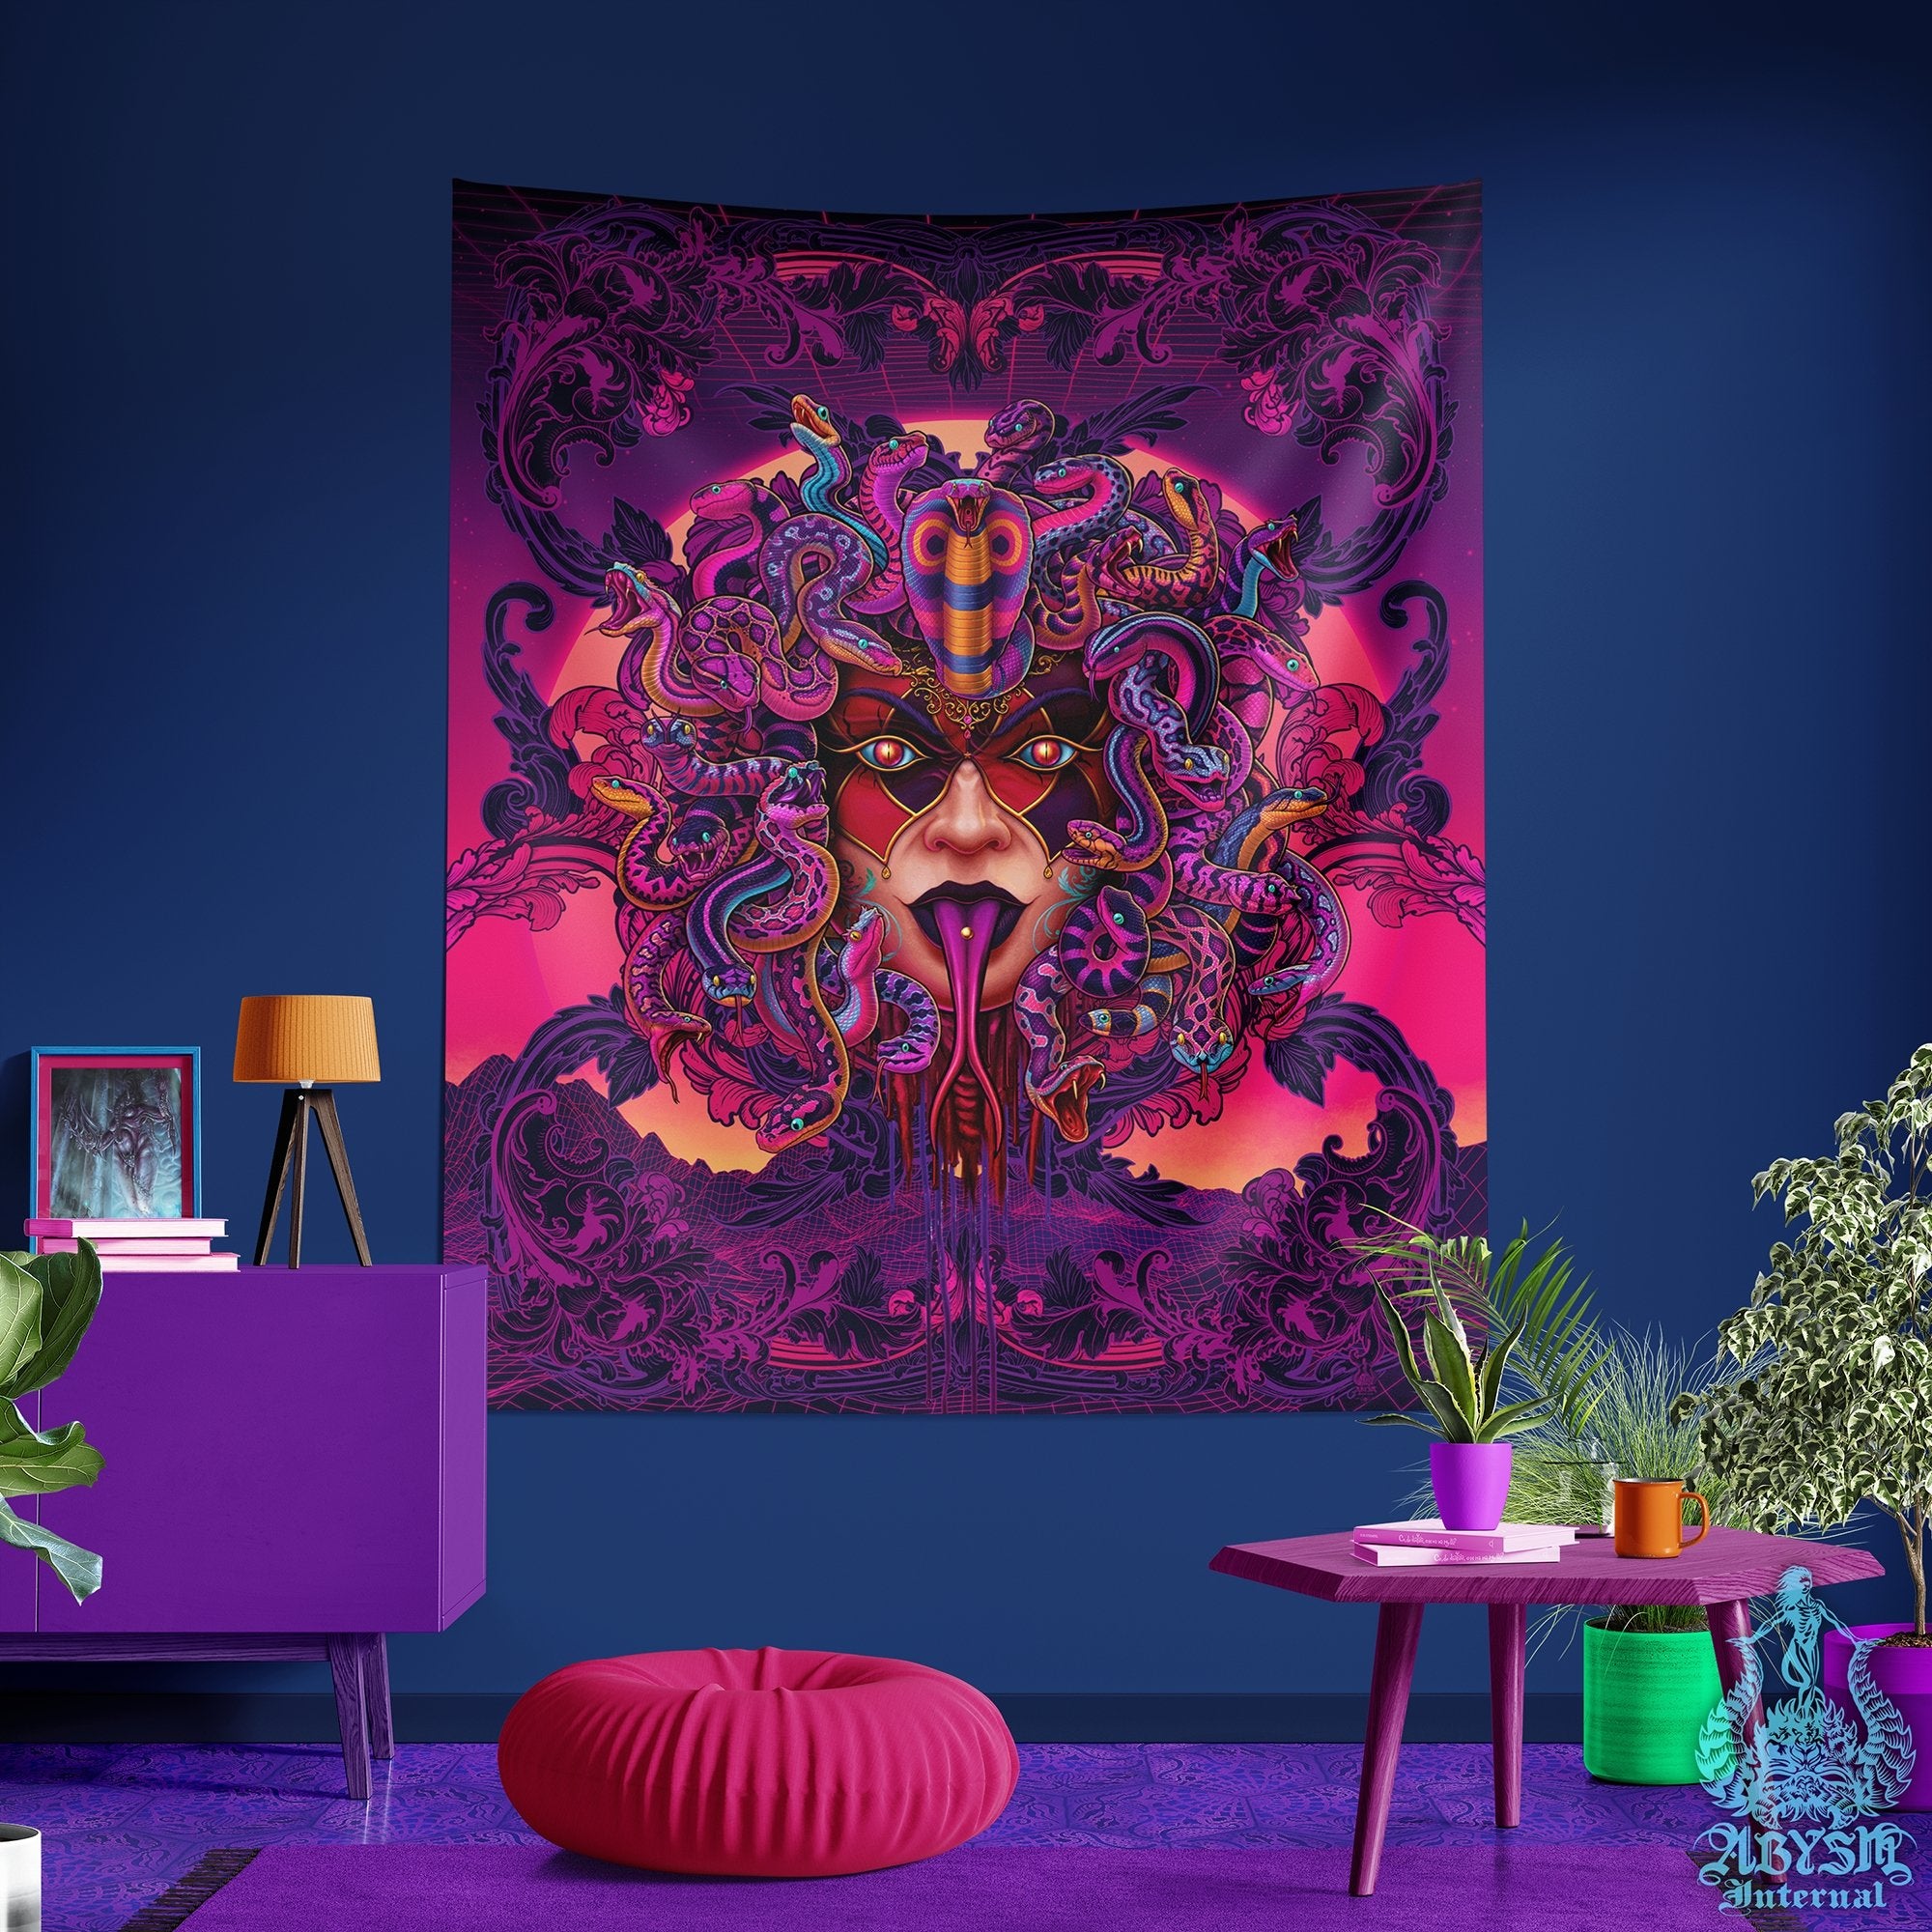 Psychedelic Tapestry, Magic Shrooms Wall Hanging, Vaporwave and Retrowave 80s Home Decor, Synthwave Art Print, Kids Room - Medusa Rage, Scream and Mock - Abysm Internal